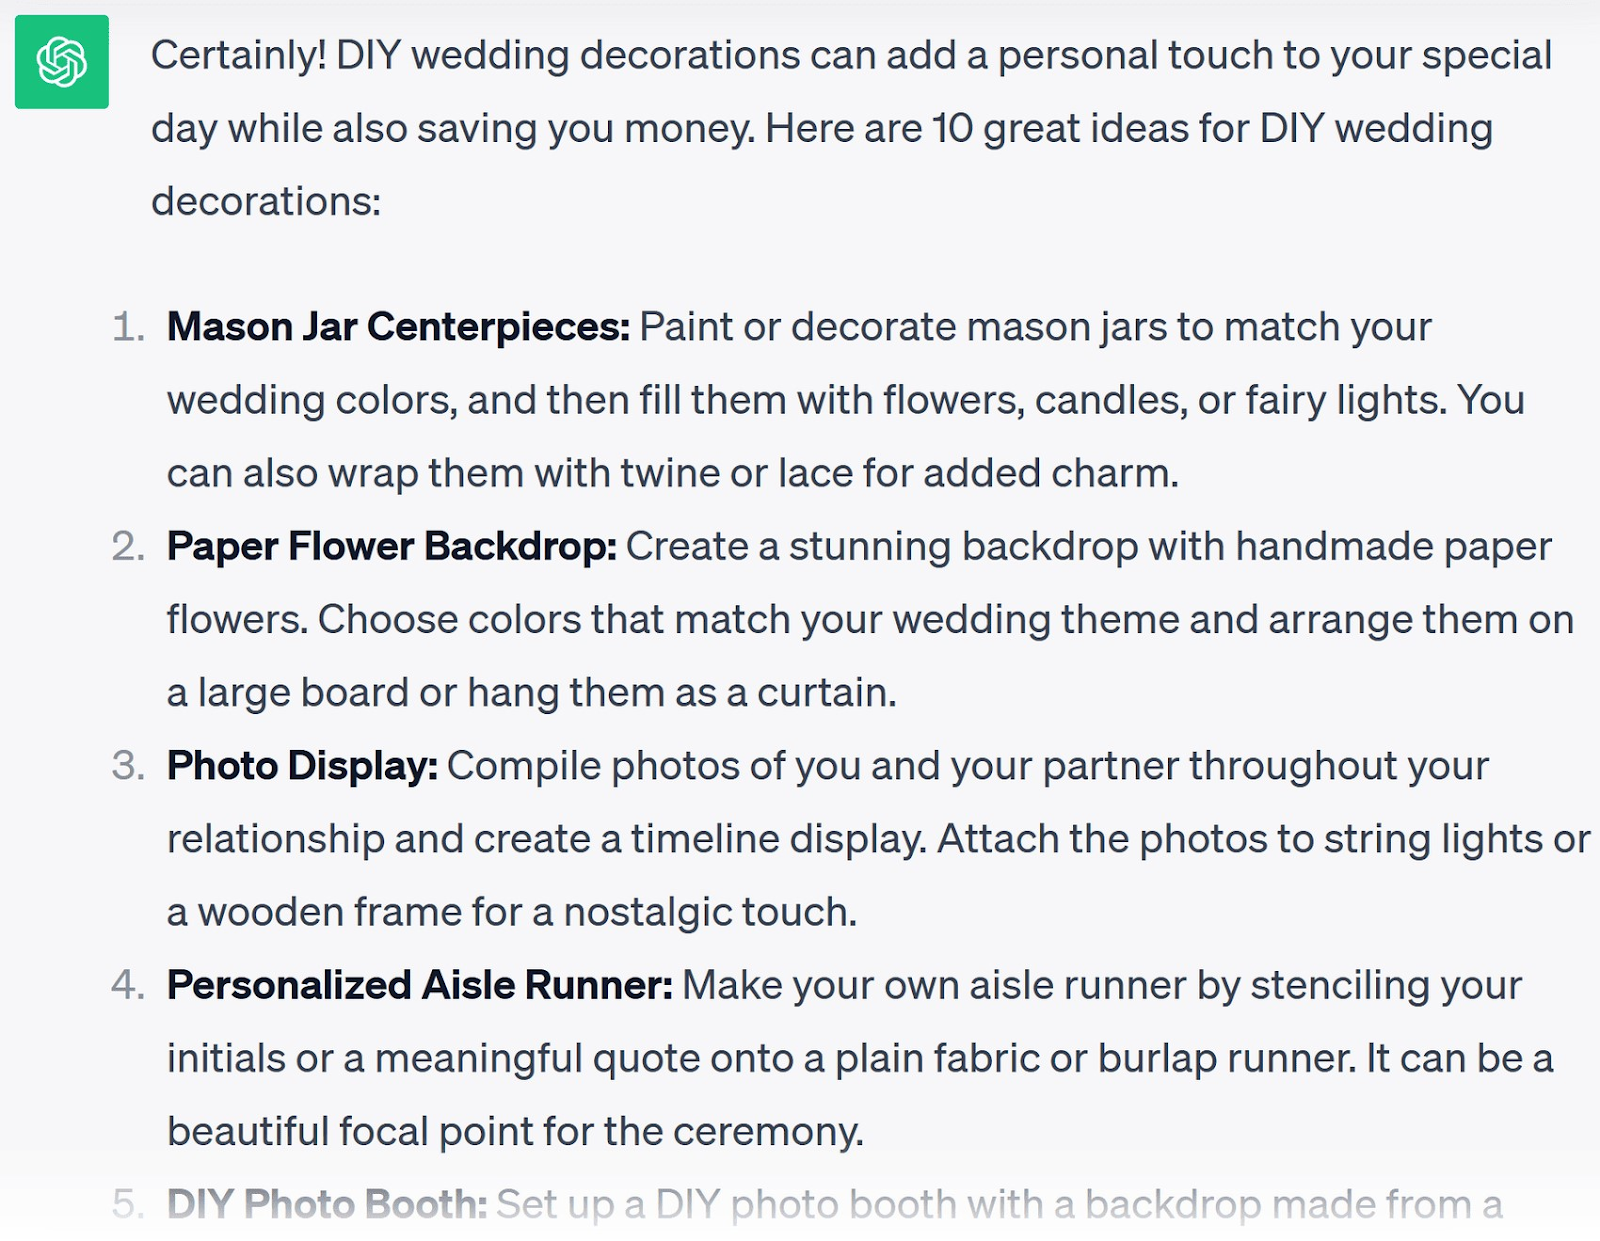 ChatGPT's response to “I need 10 great ideas for diy wedding decorations” prompt